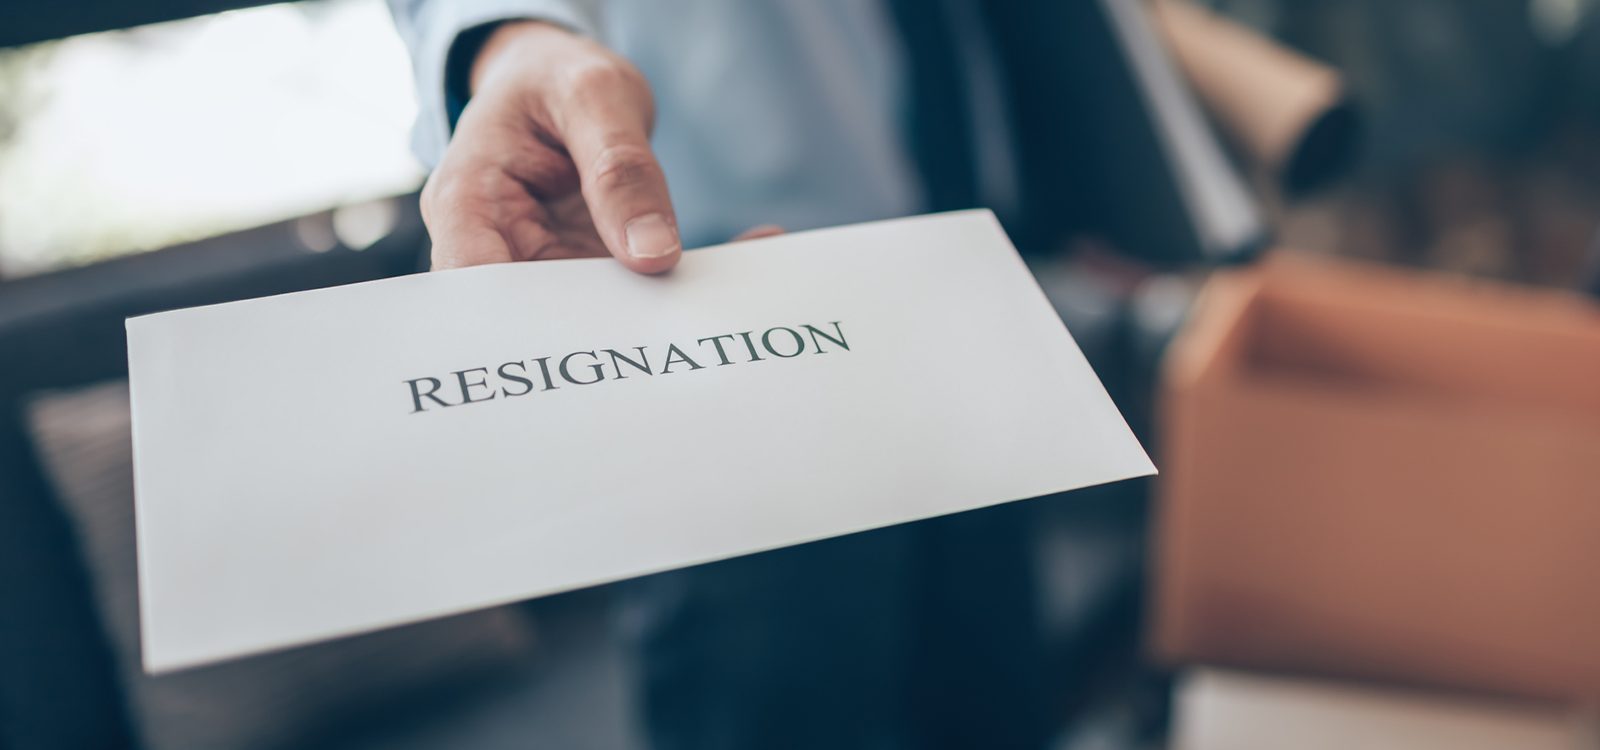 The great actuarial resignation – is it upon us? And what can be done about it?